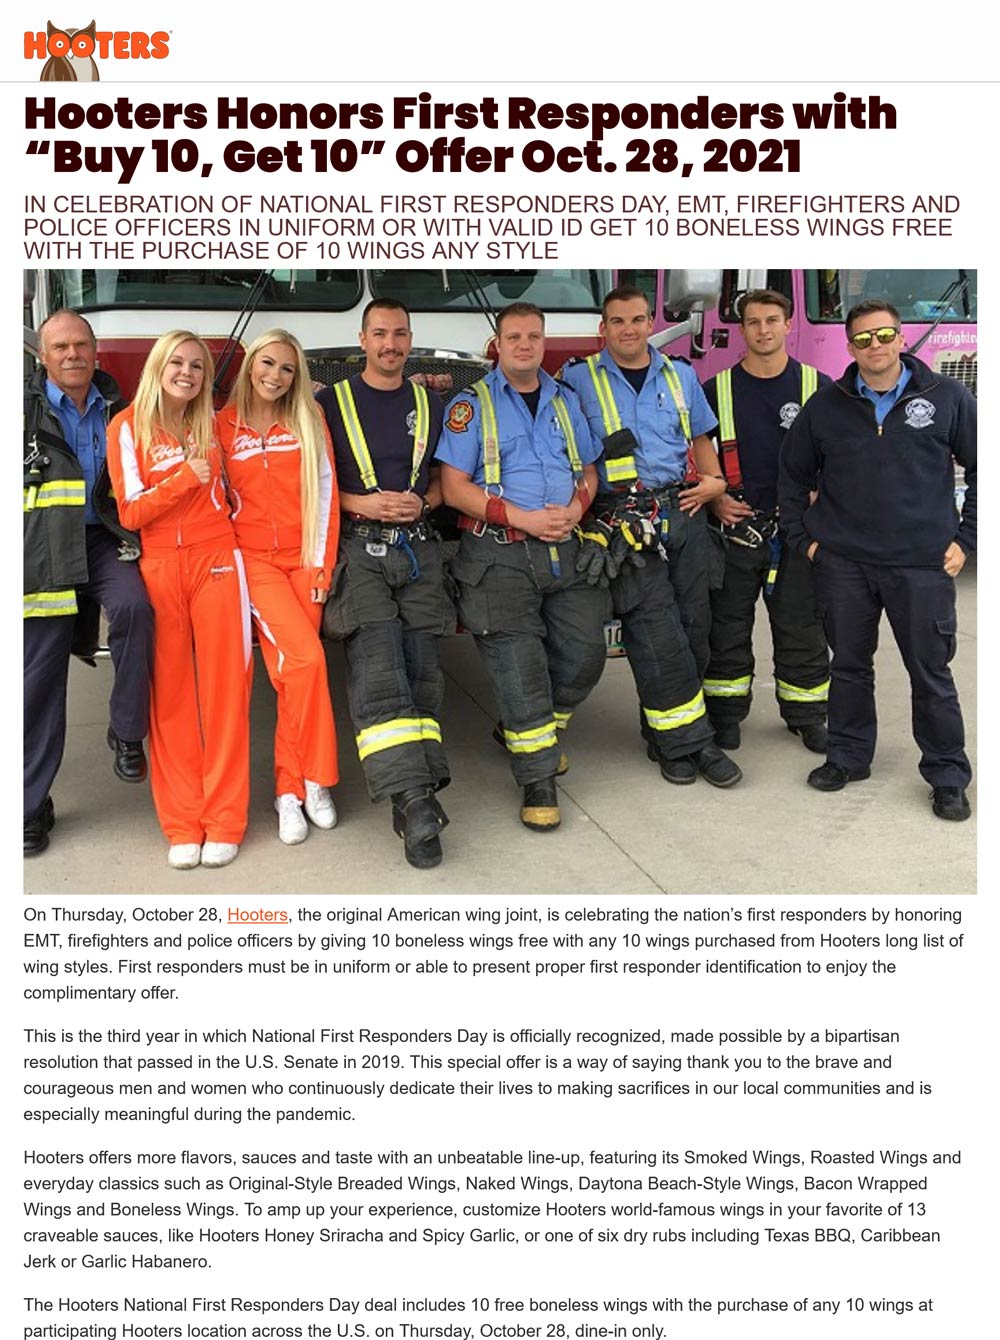 Hooters restaurants Coupon  First responders enjoy 2nd 10pc wings free today at Hooters restaurants #hooters 